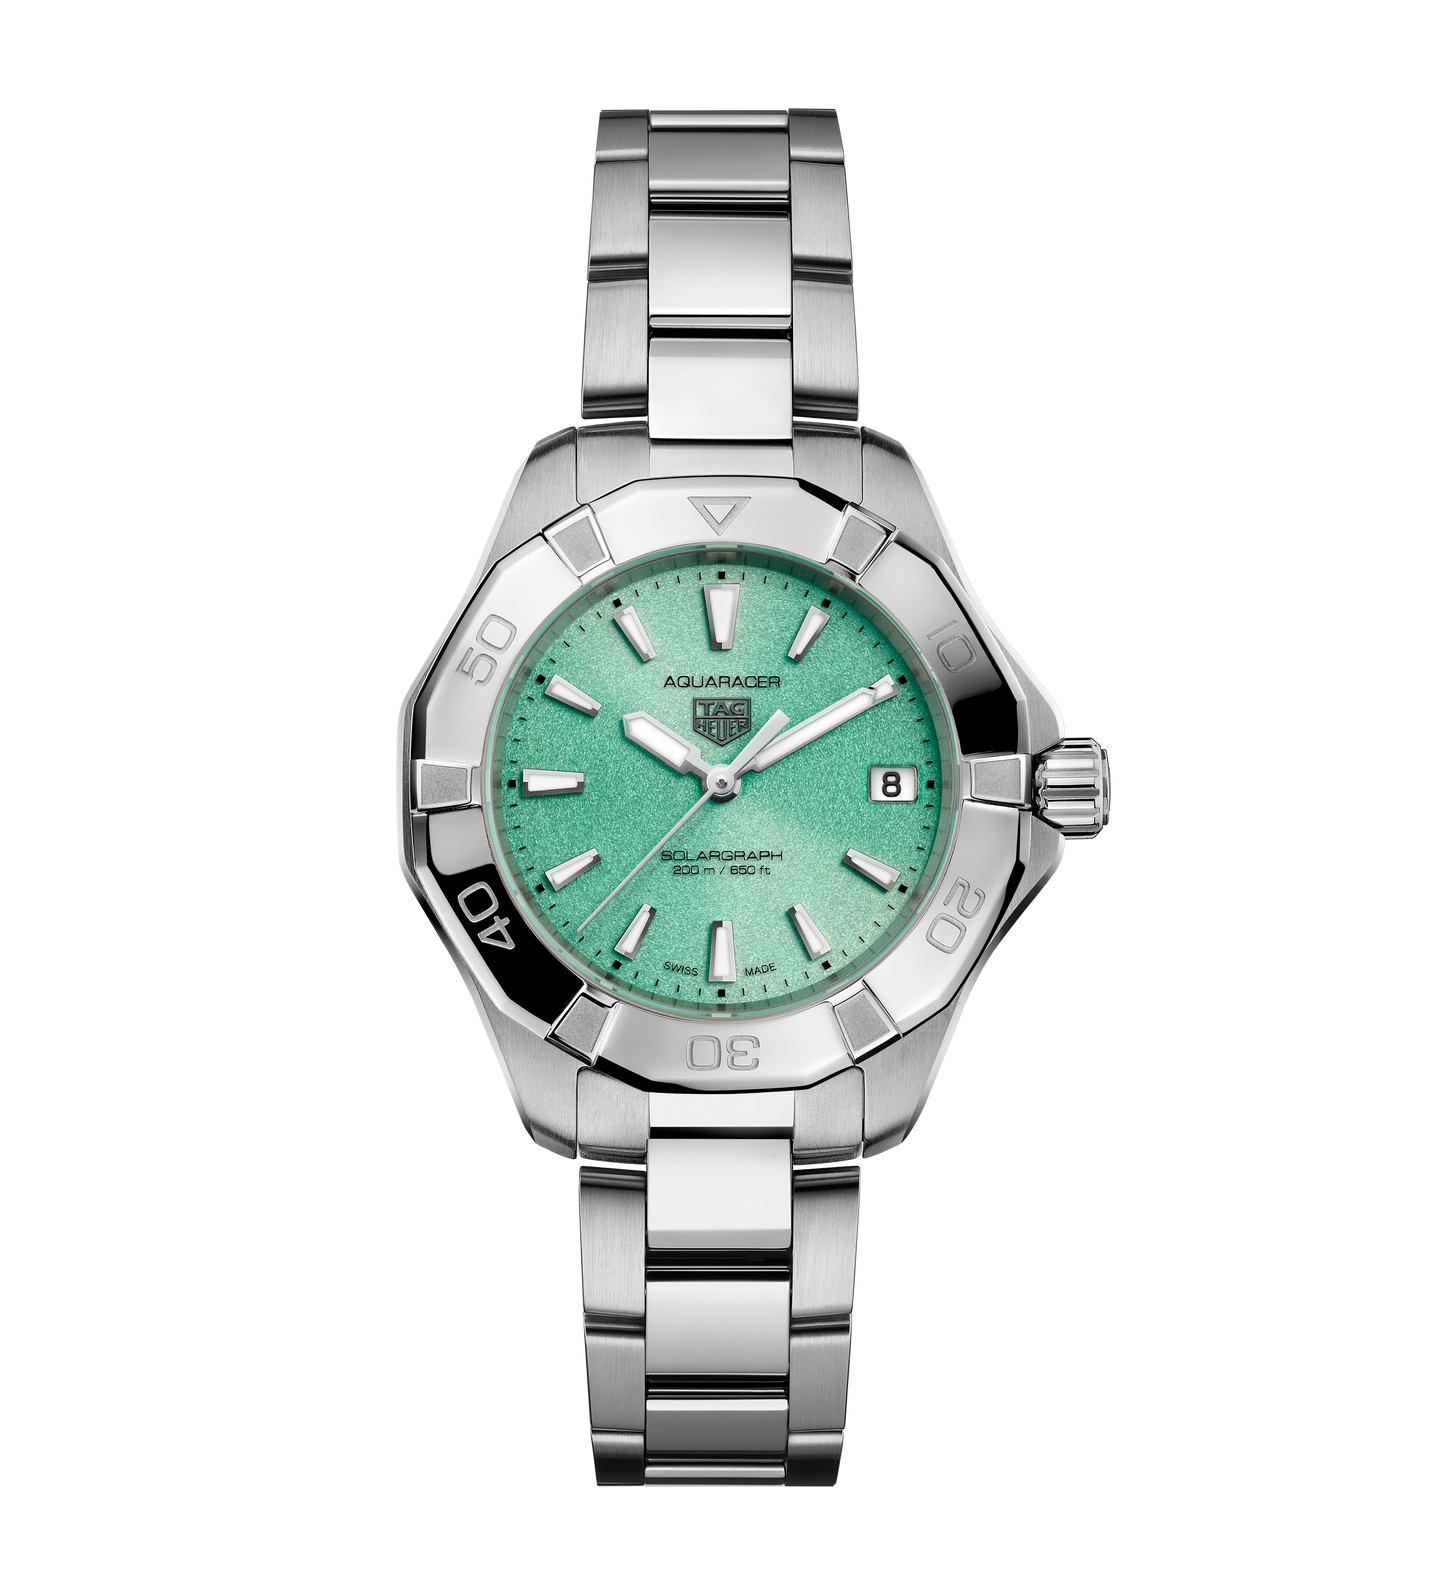 TAG Heuer Aquaracer Professional 200 Solargraph Watch with Green Dial